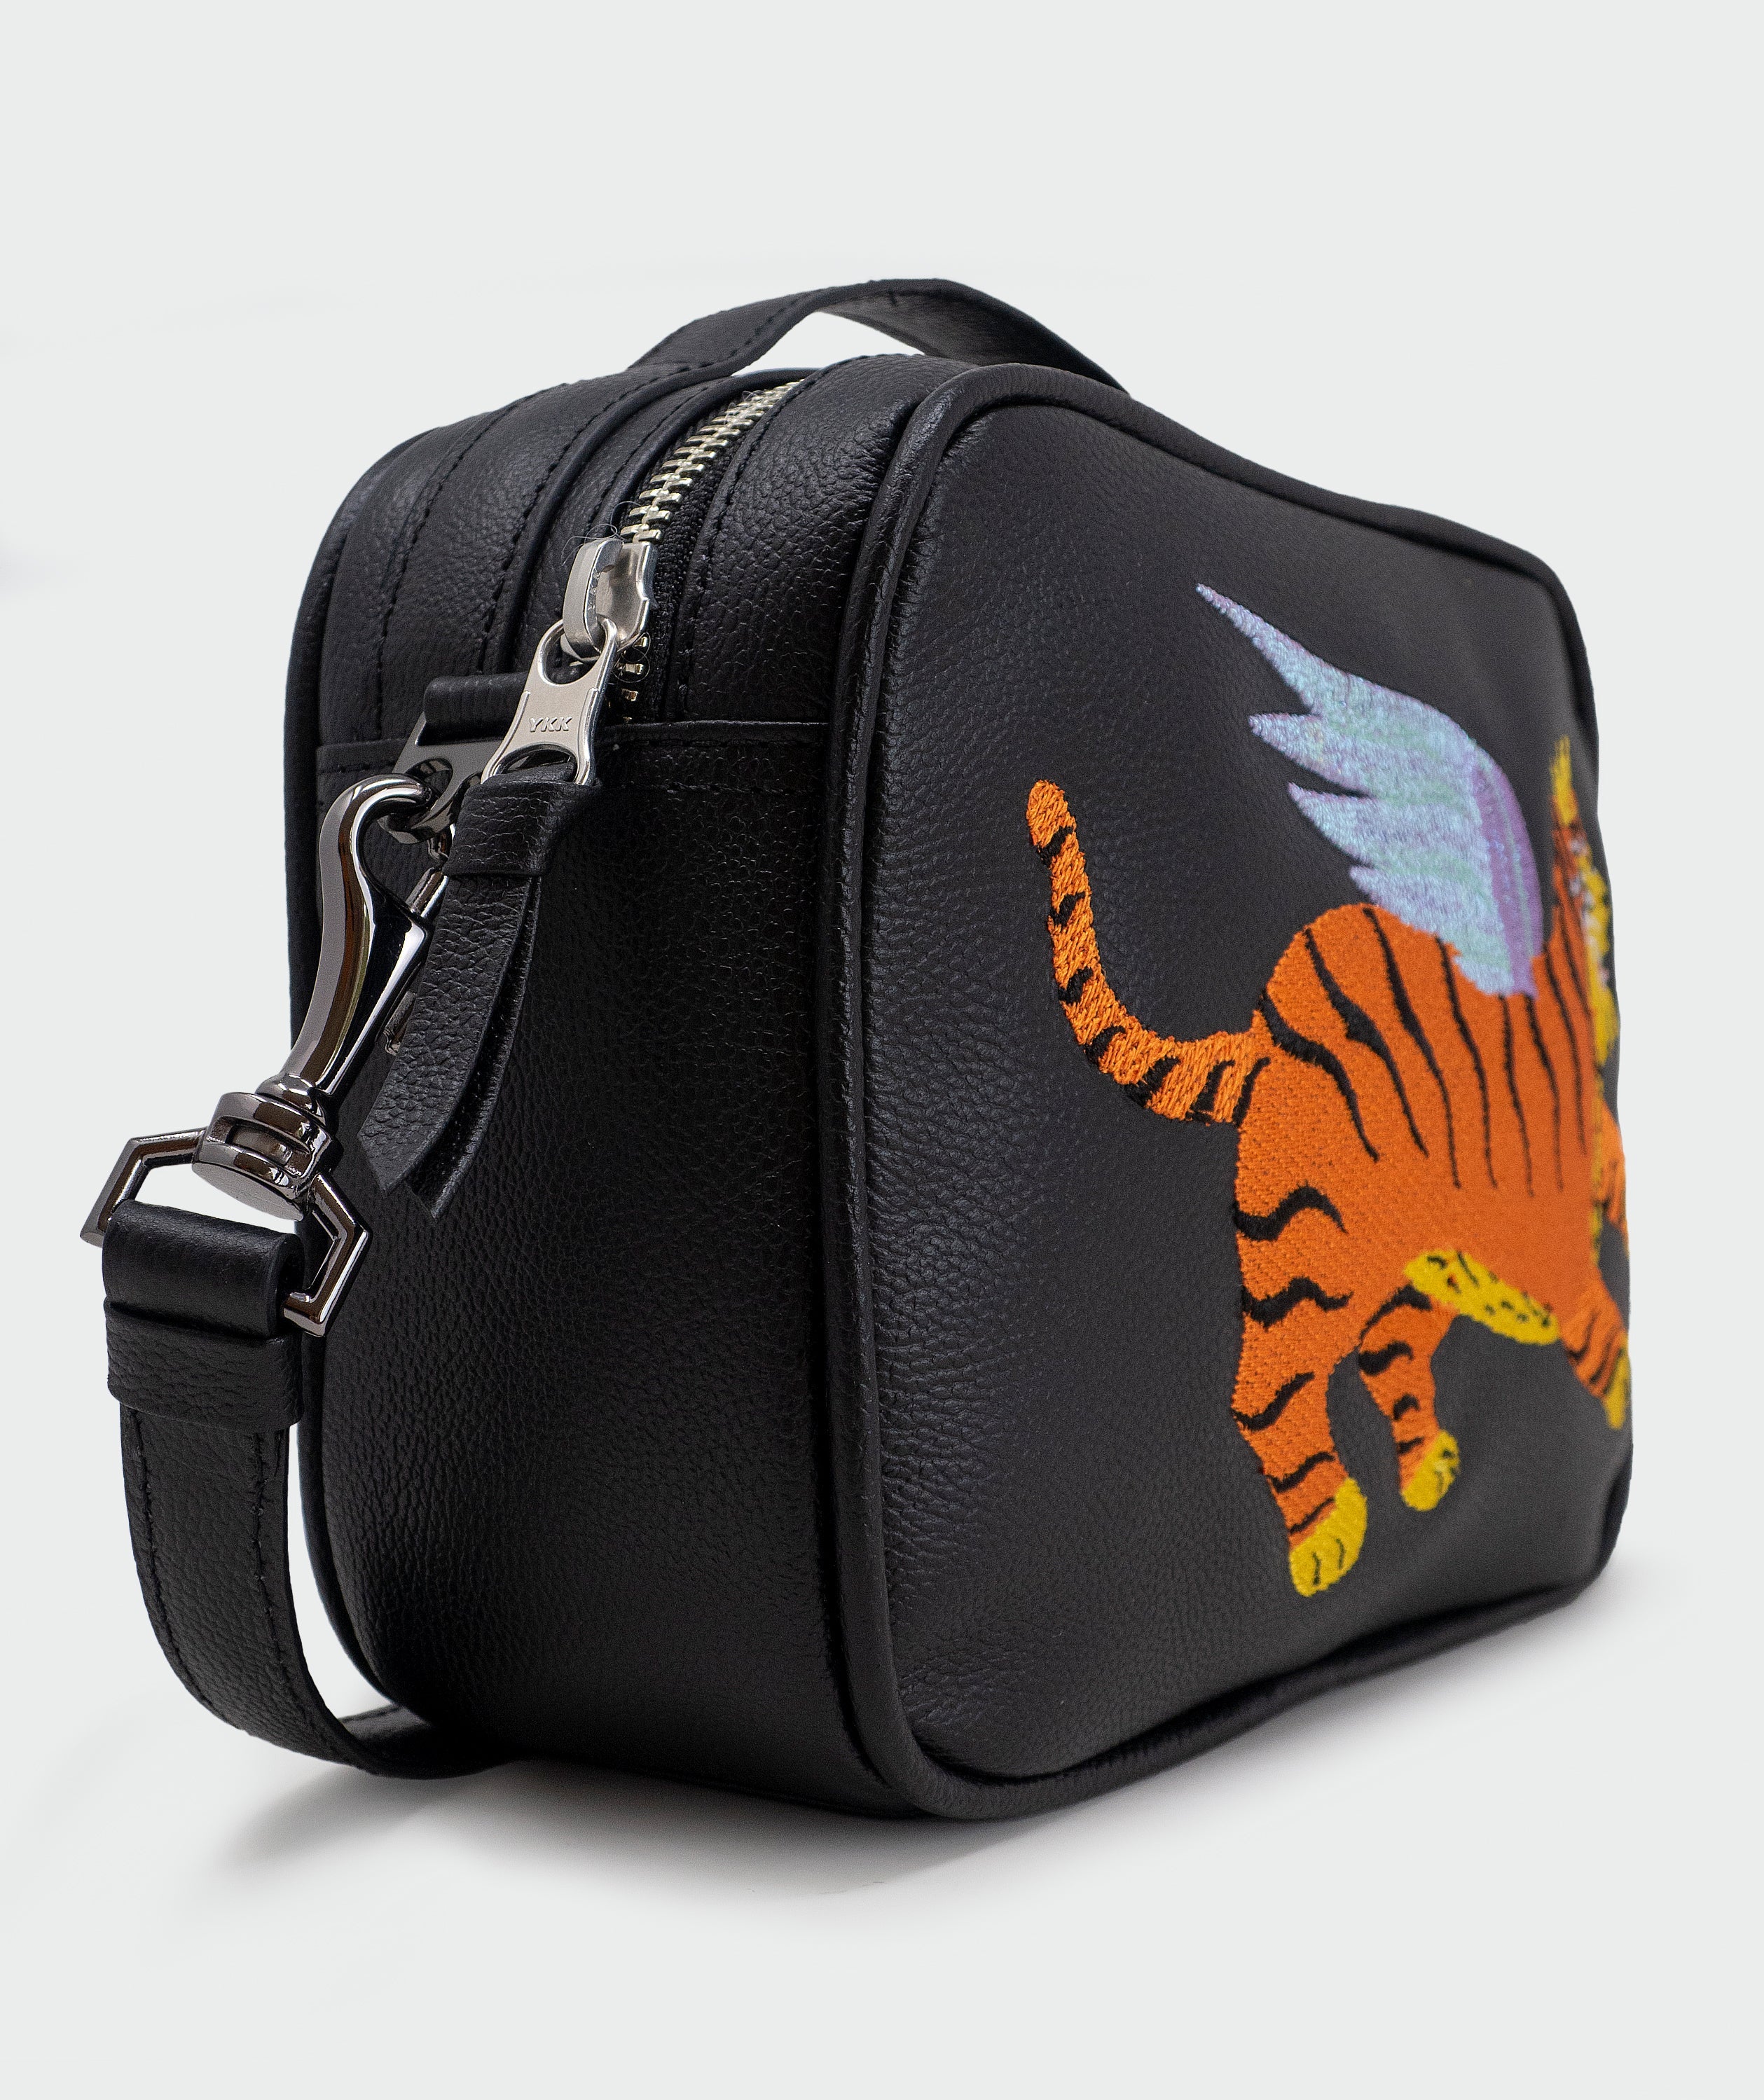 Black Leather Box Bag: Tiger Wings Embroidery | NYC Slow Fashion 